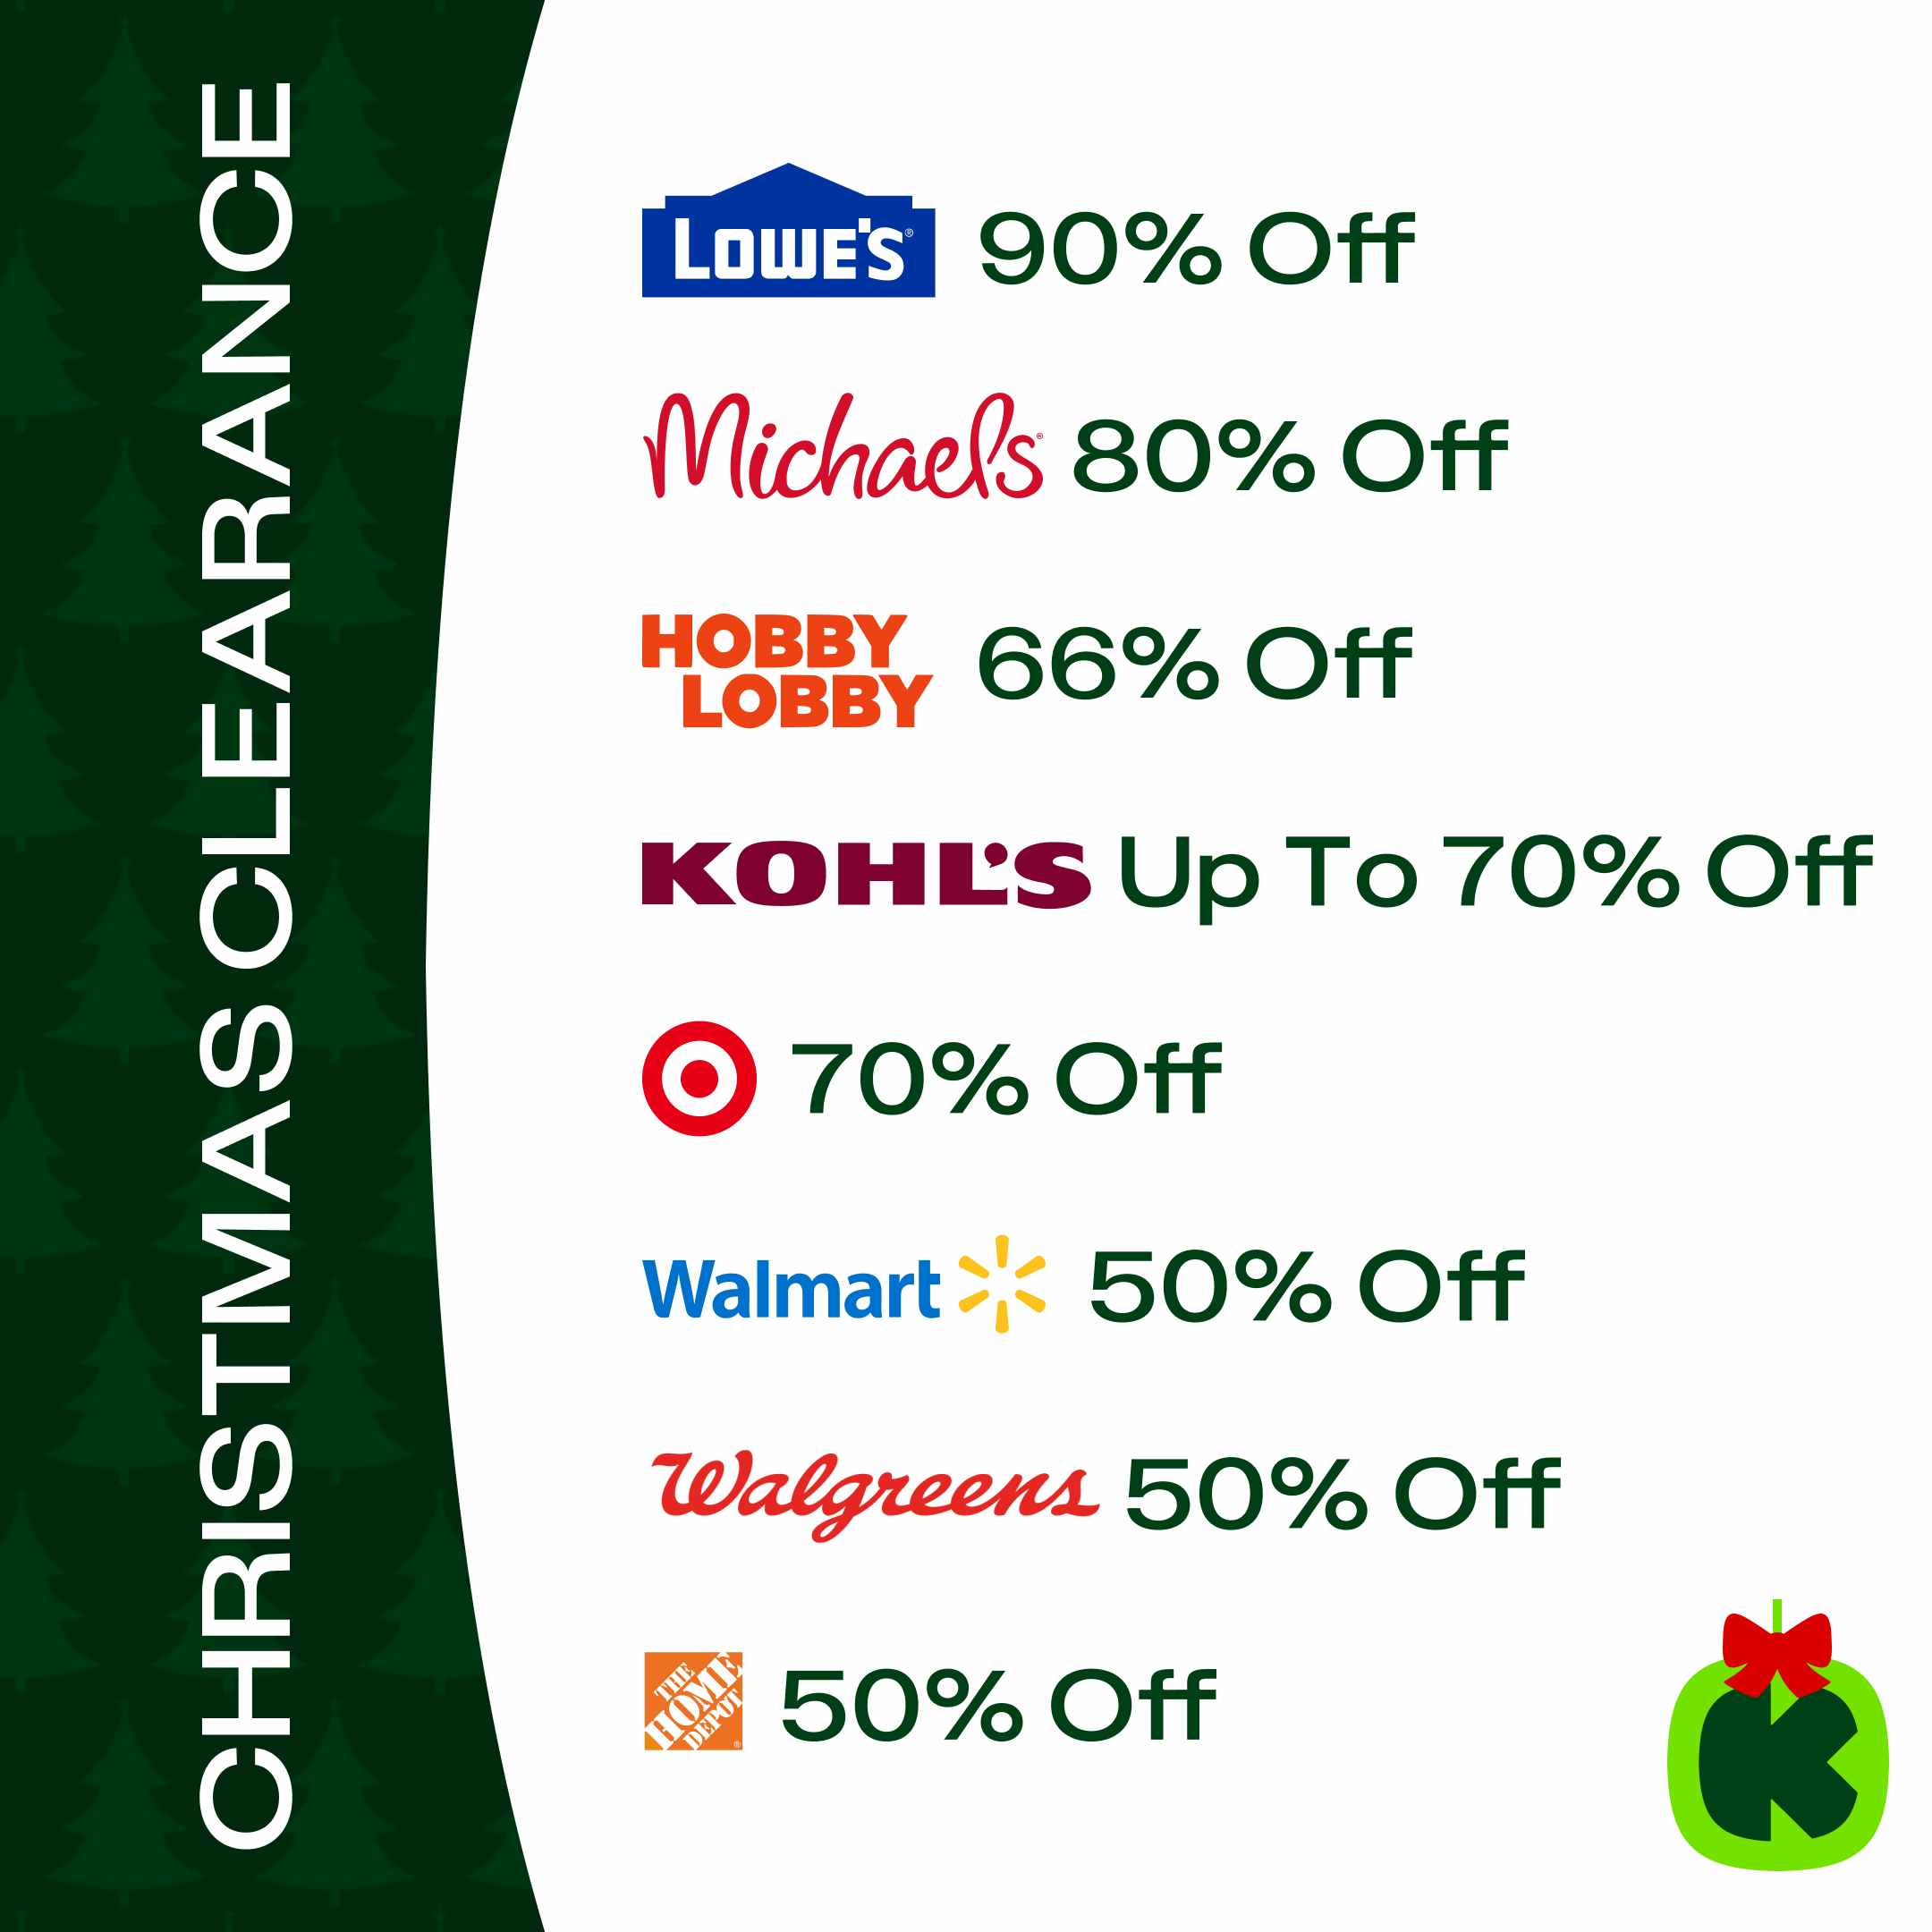 My Target 90% off Christmas Clearance Finds (Spent $23, Saved $207)